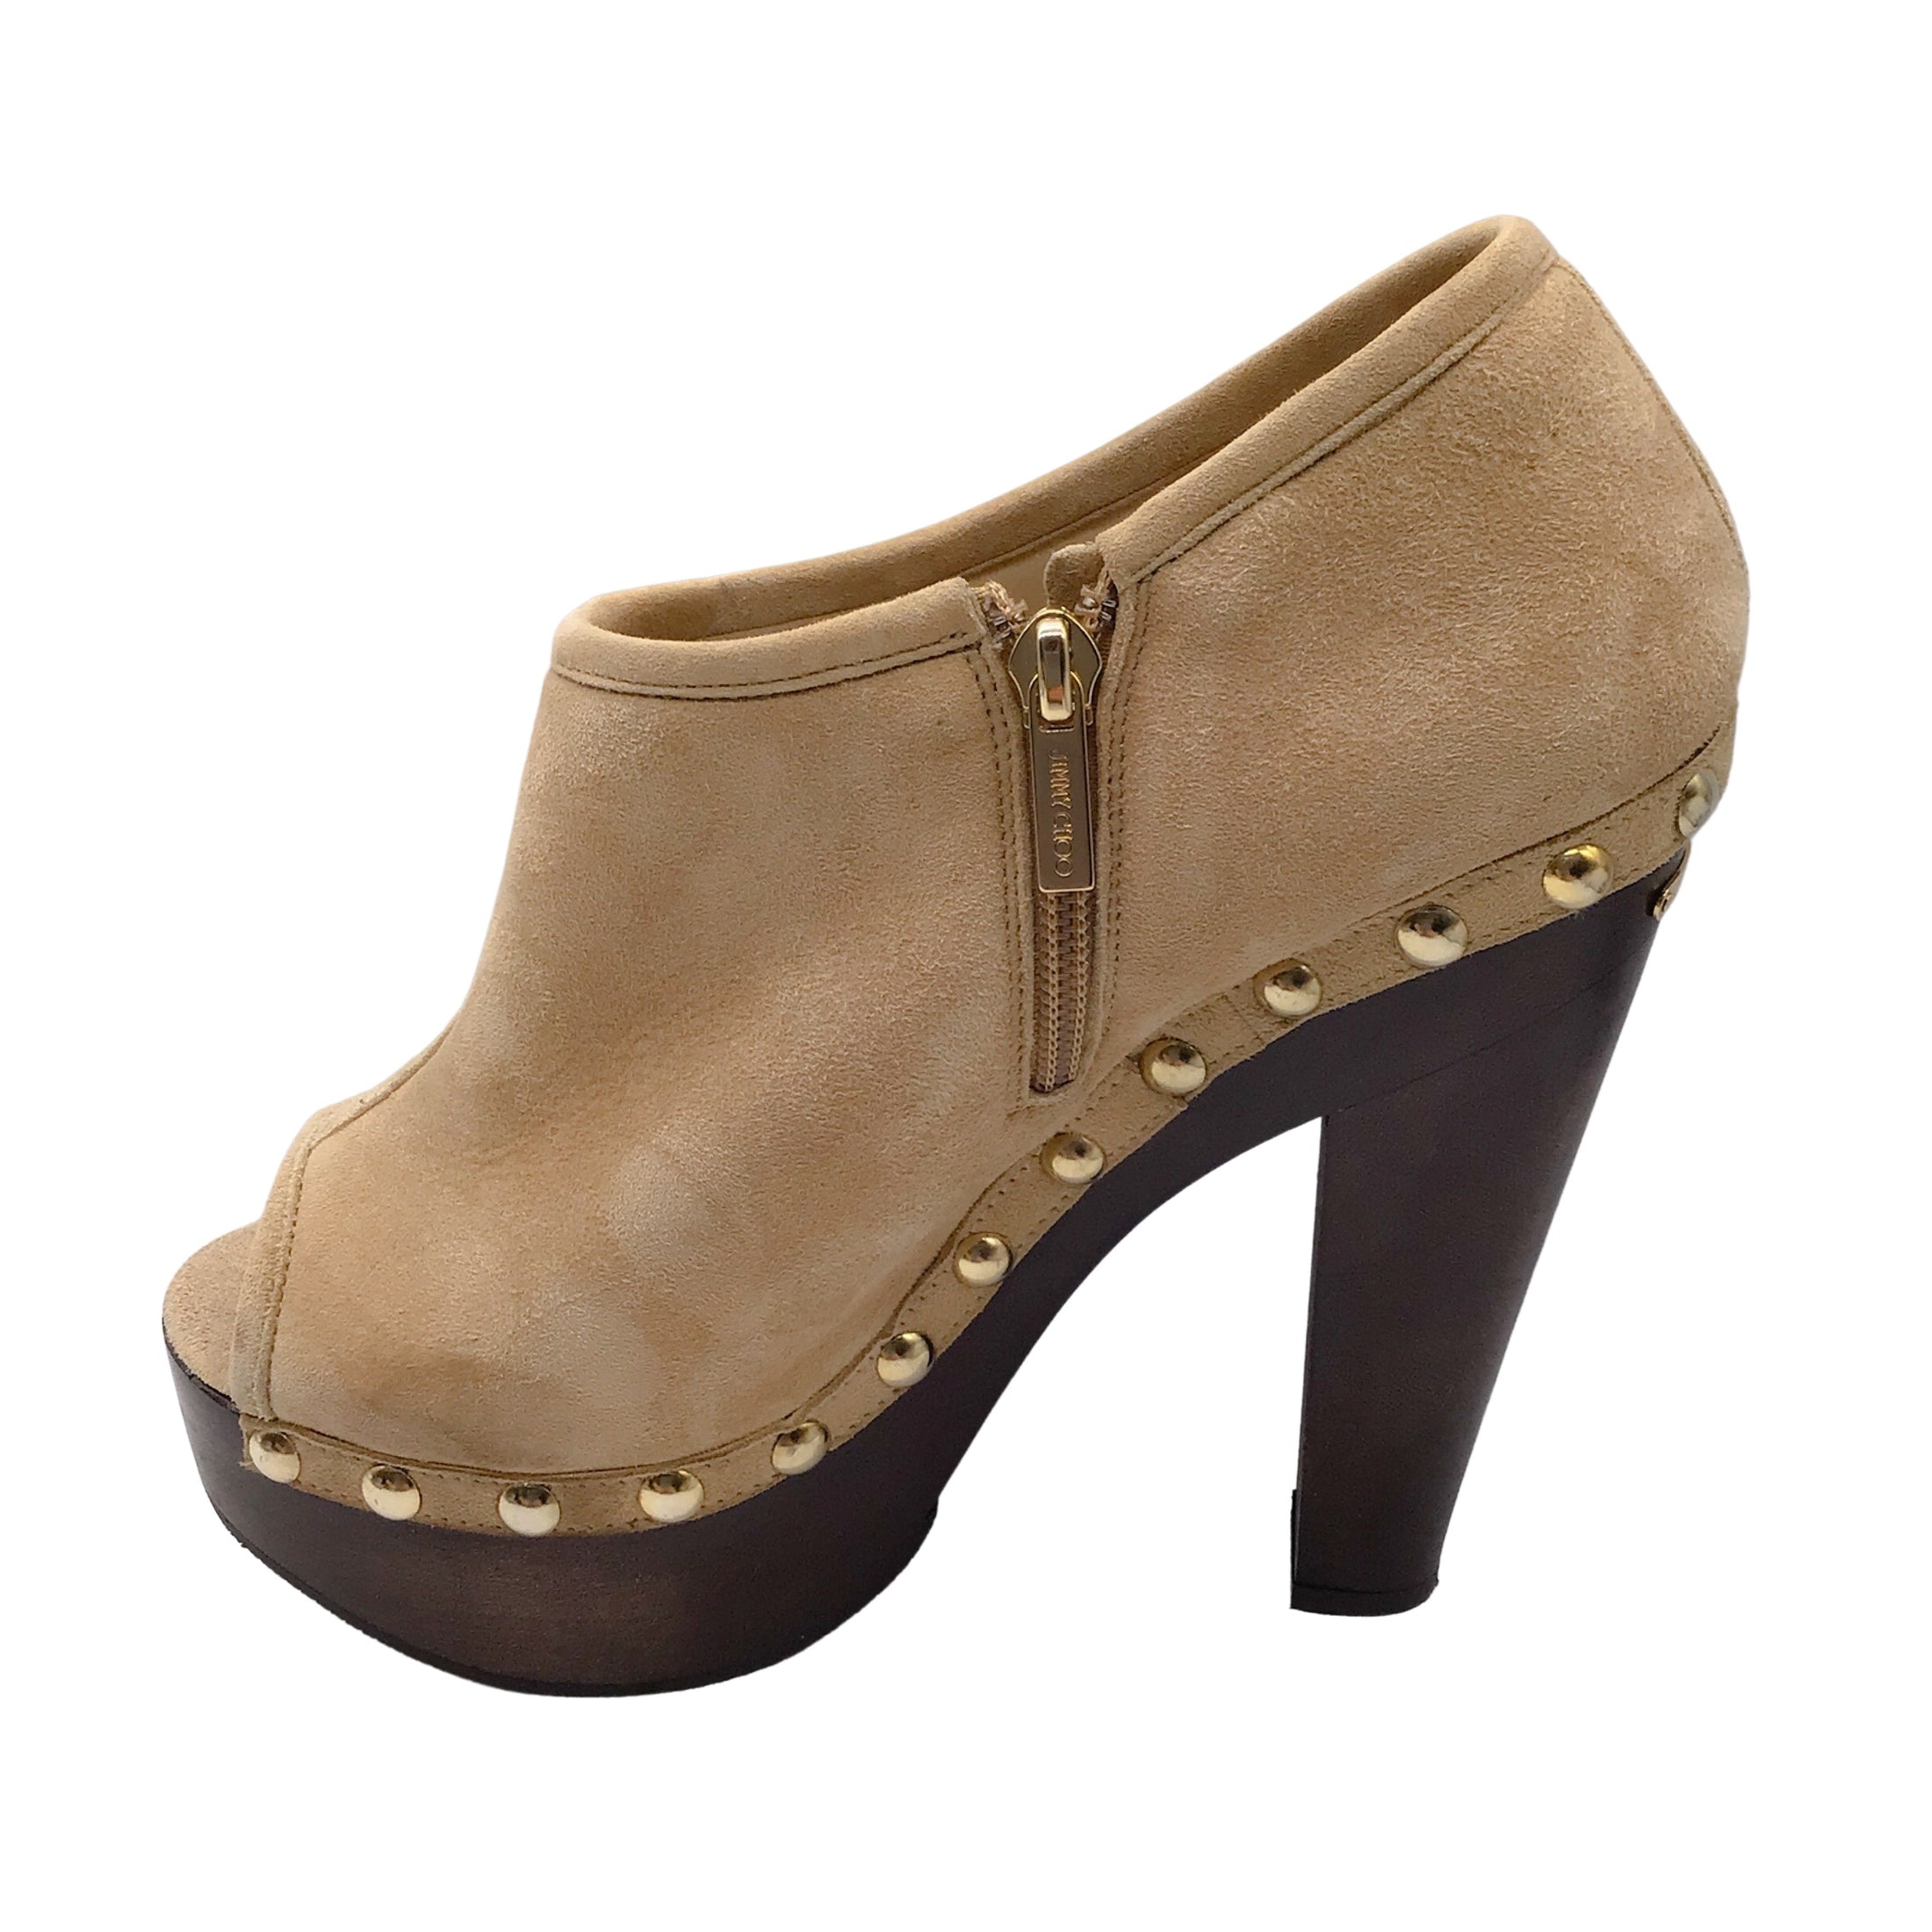 Jimmy Choo Urge Beige / Gold Studded Suede Leather Peep Toe Clog Ankle Boots / Booties